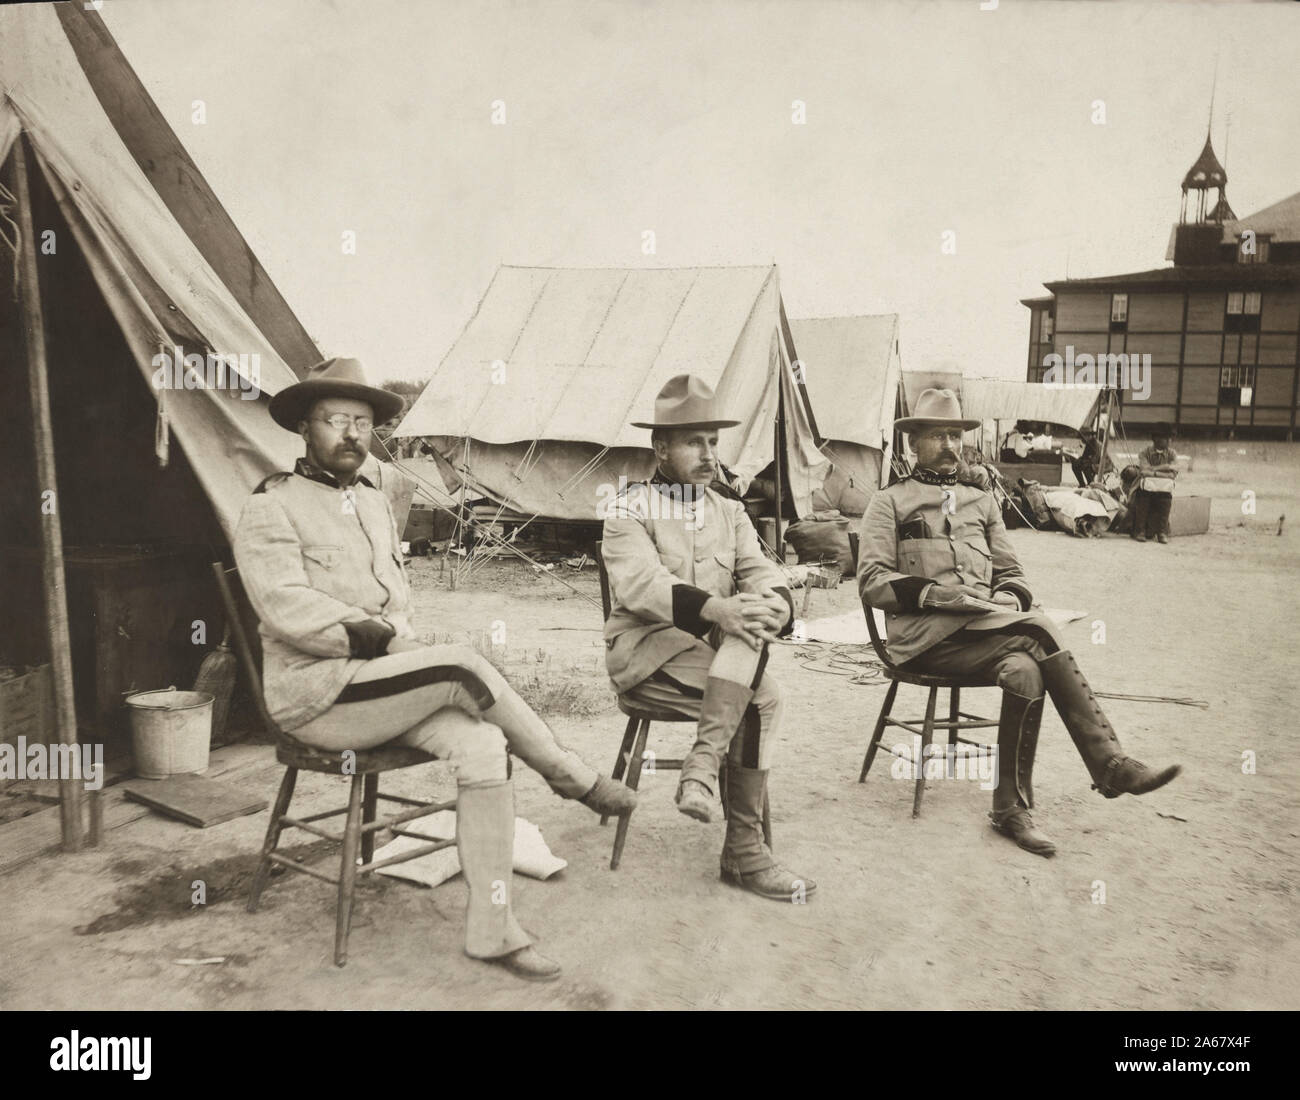 Colonel Theodore Roosevelt, Leonard Wood, and Alexander O. Brodie Sitting in front of Camp Tents, San Antonio, Texas, USA, Photograph by Paul Thompson, 1898 Stock Photo